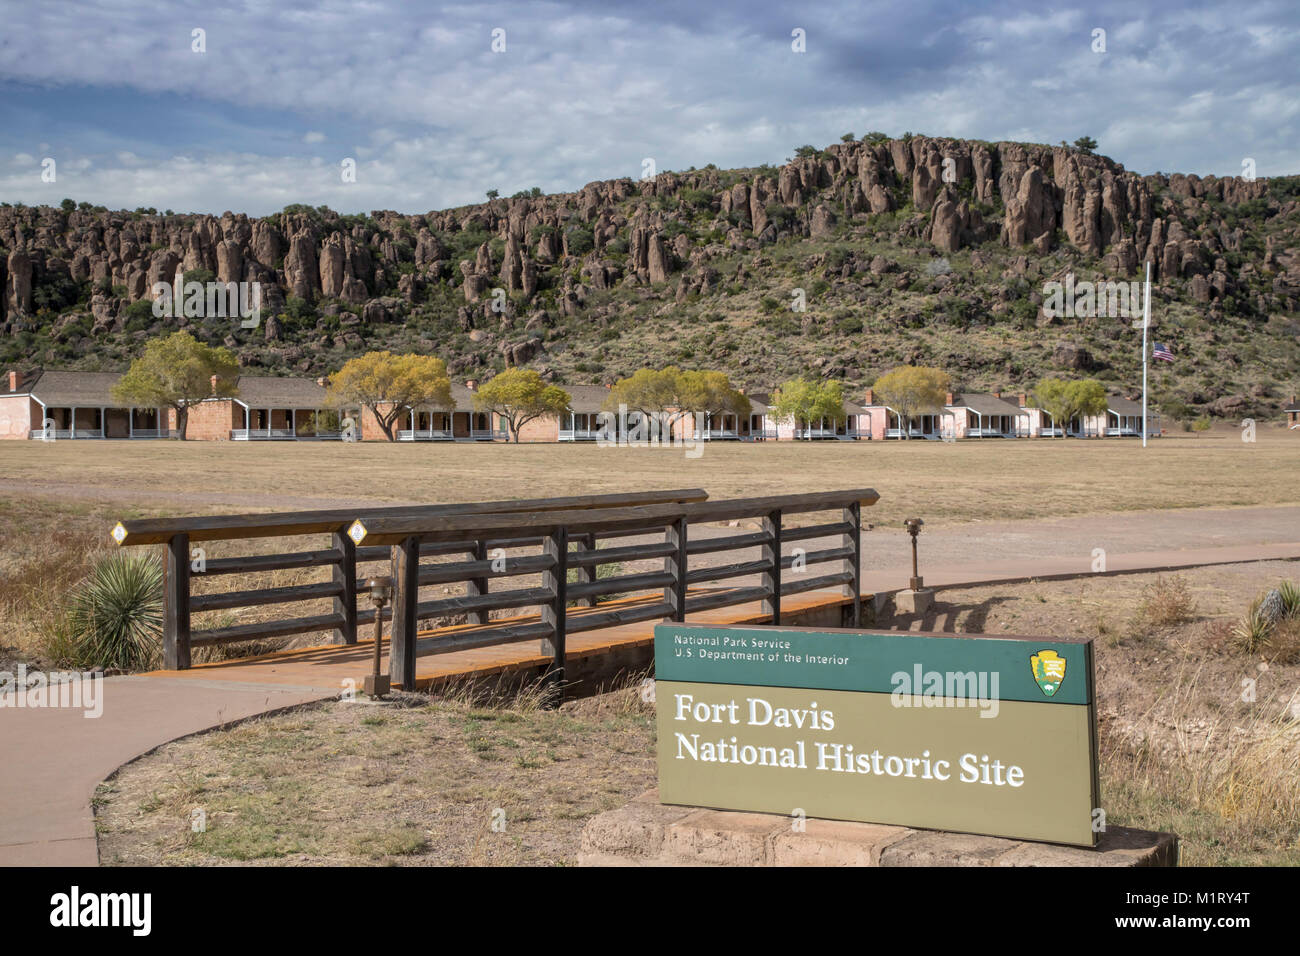 Fort Davis, Texas - Fort Davis National Historic Site. Named after Secretary of War Jefferson Davis, who became president of the Confederate States du Stock Photo